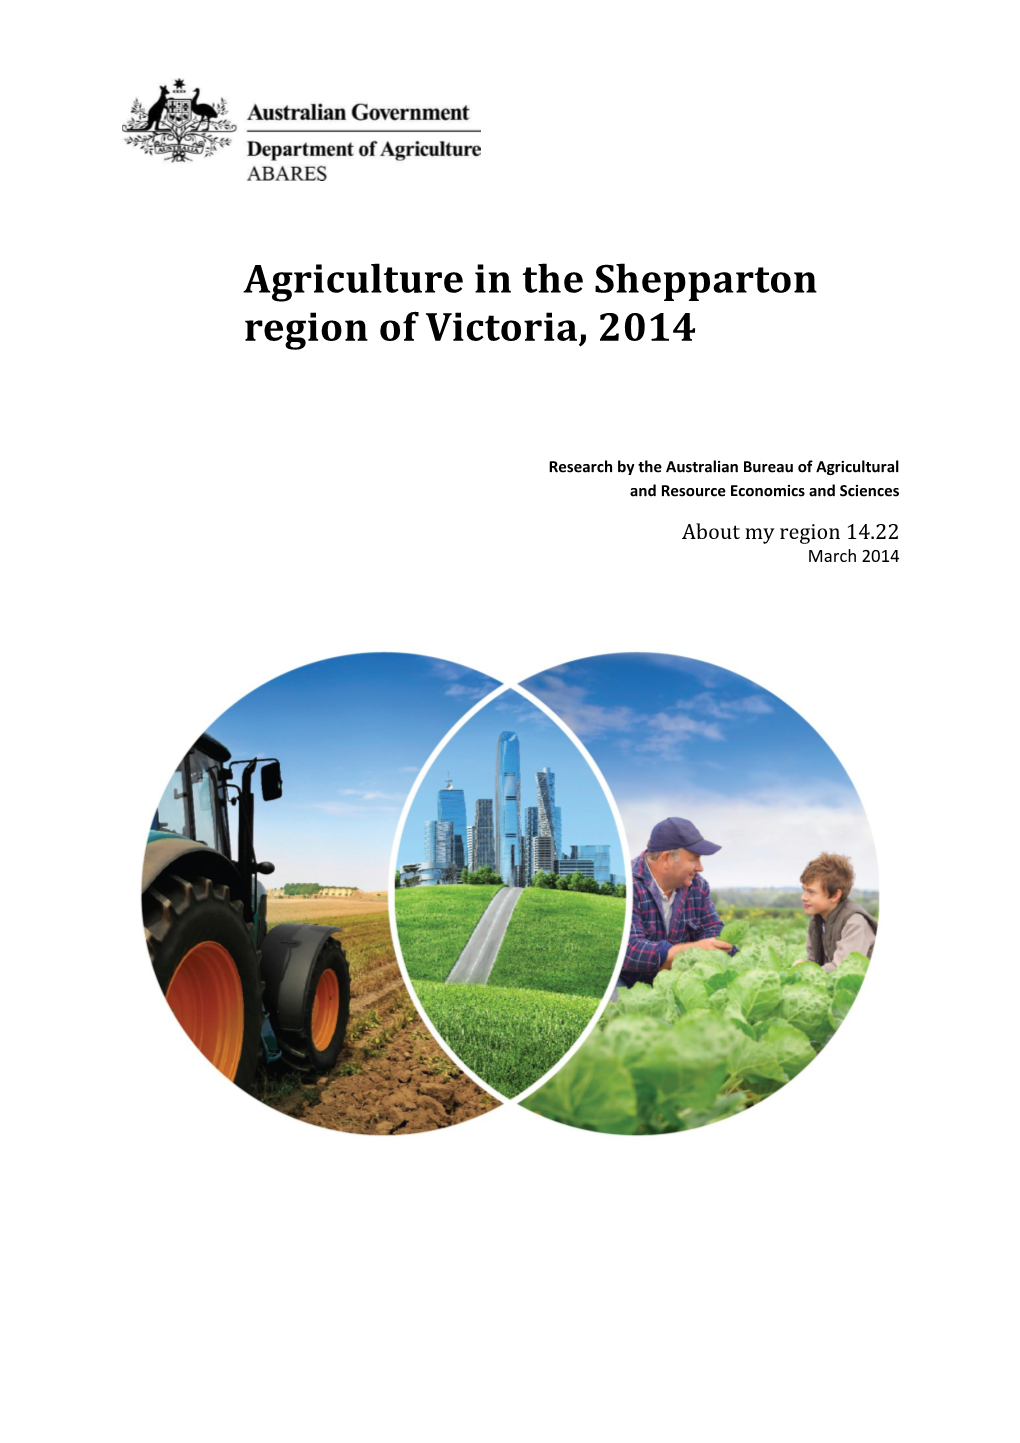 Agriculture in the Shepparton Region of Victoria, 2014